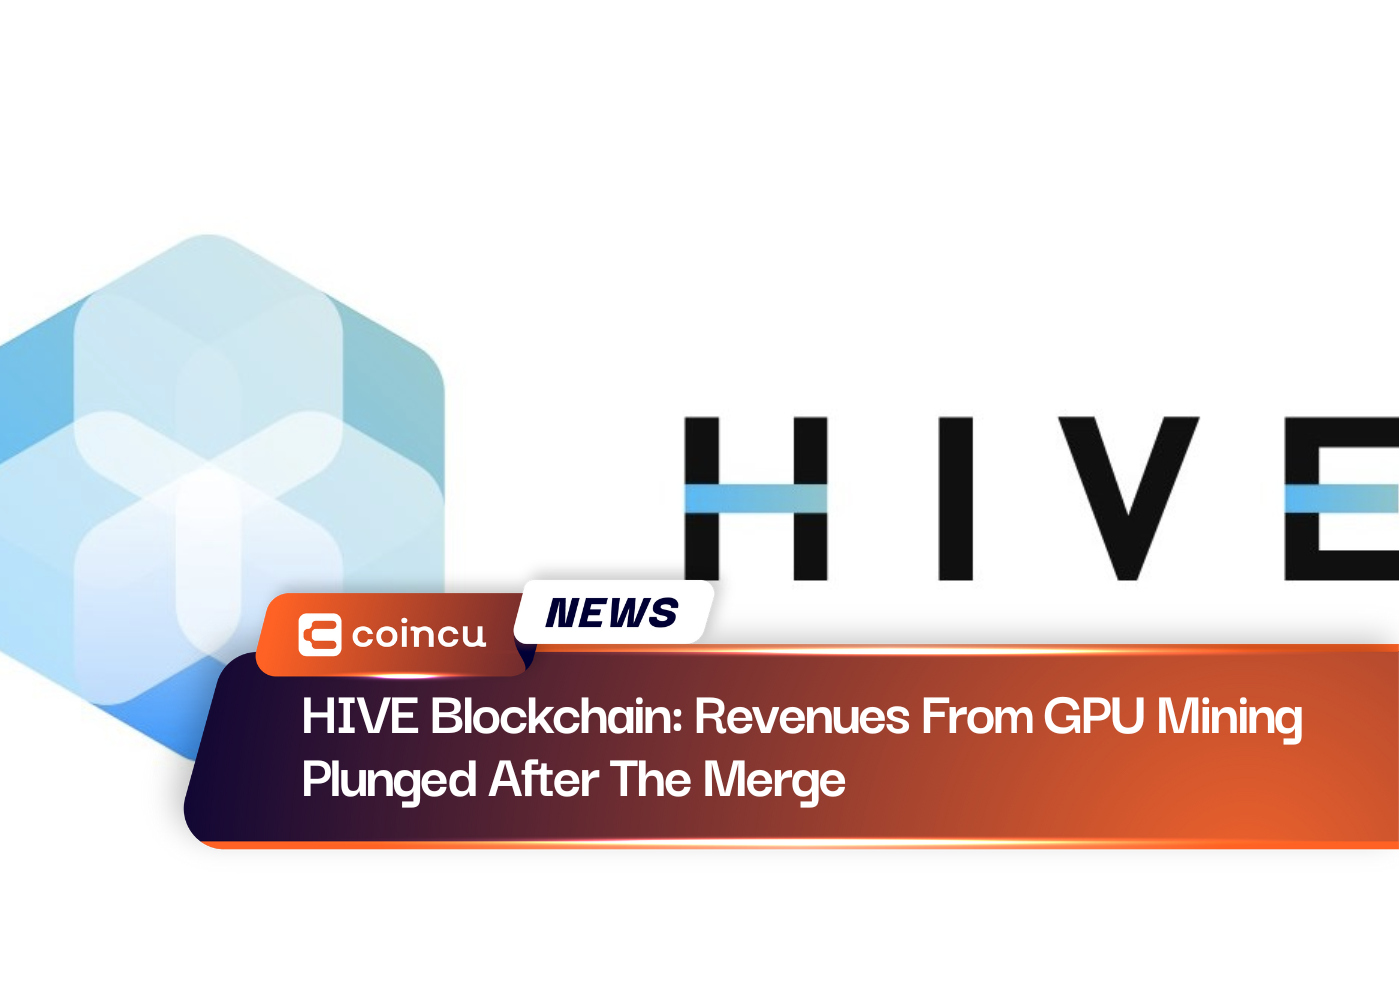 HIVE Blockchain: Revenues From GPU Mining Plunged After The Merge